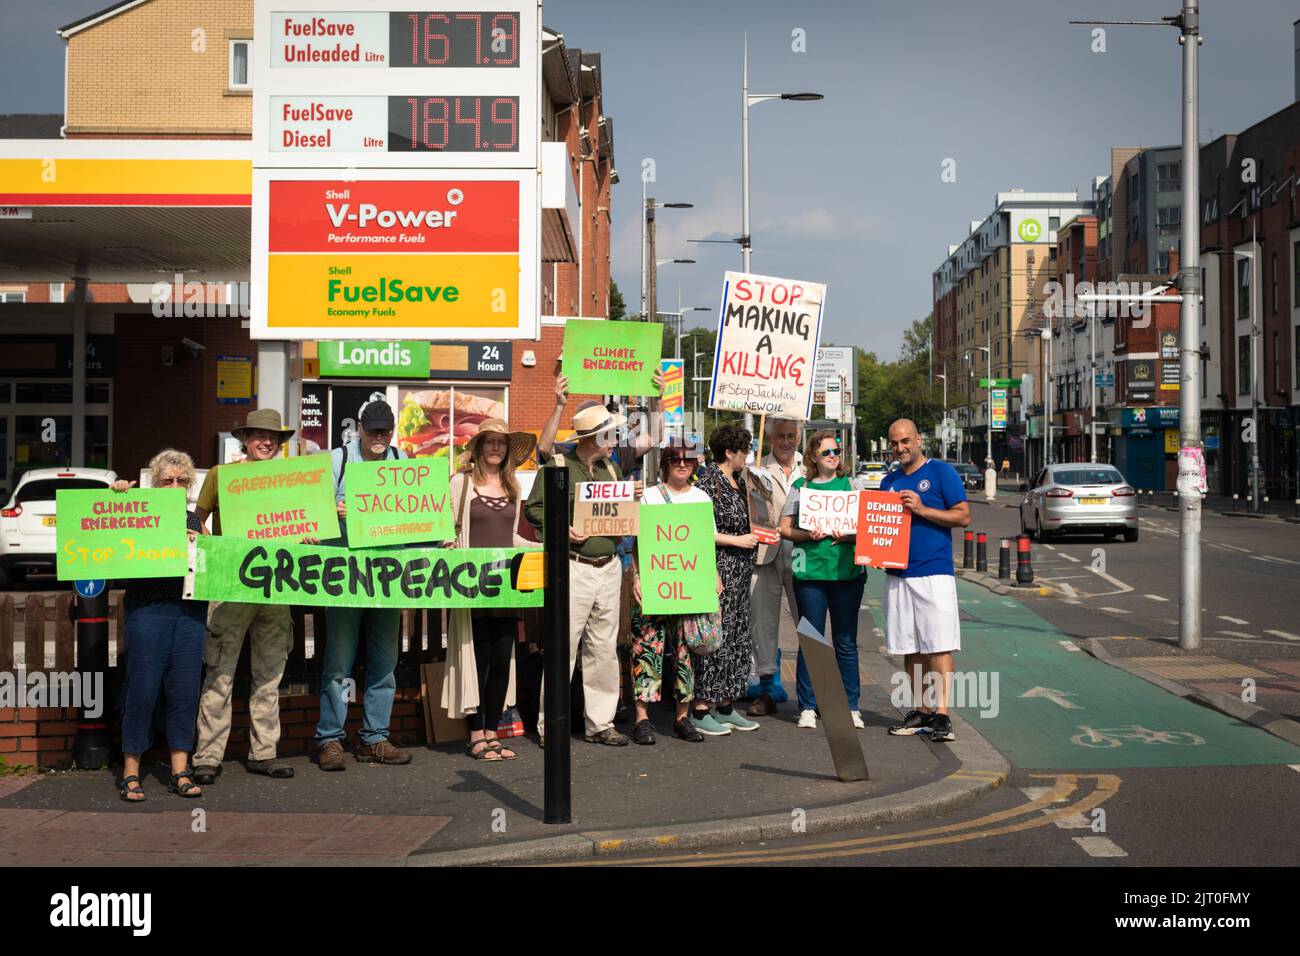 Manchester, UK. 27th Aug, 2022. Members of the environment group Greenpeace protest outside a Shell forecourt. The movement is trying to raise awareness of the proposed Jackdaw oilfield in the north sea which will only add to the climate emergency. Credit: Andy Barton/Alamy Live News Stock Photo